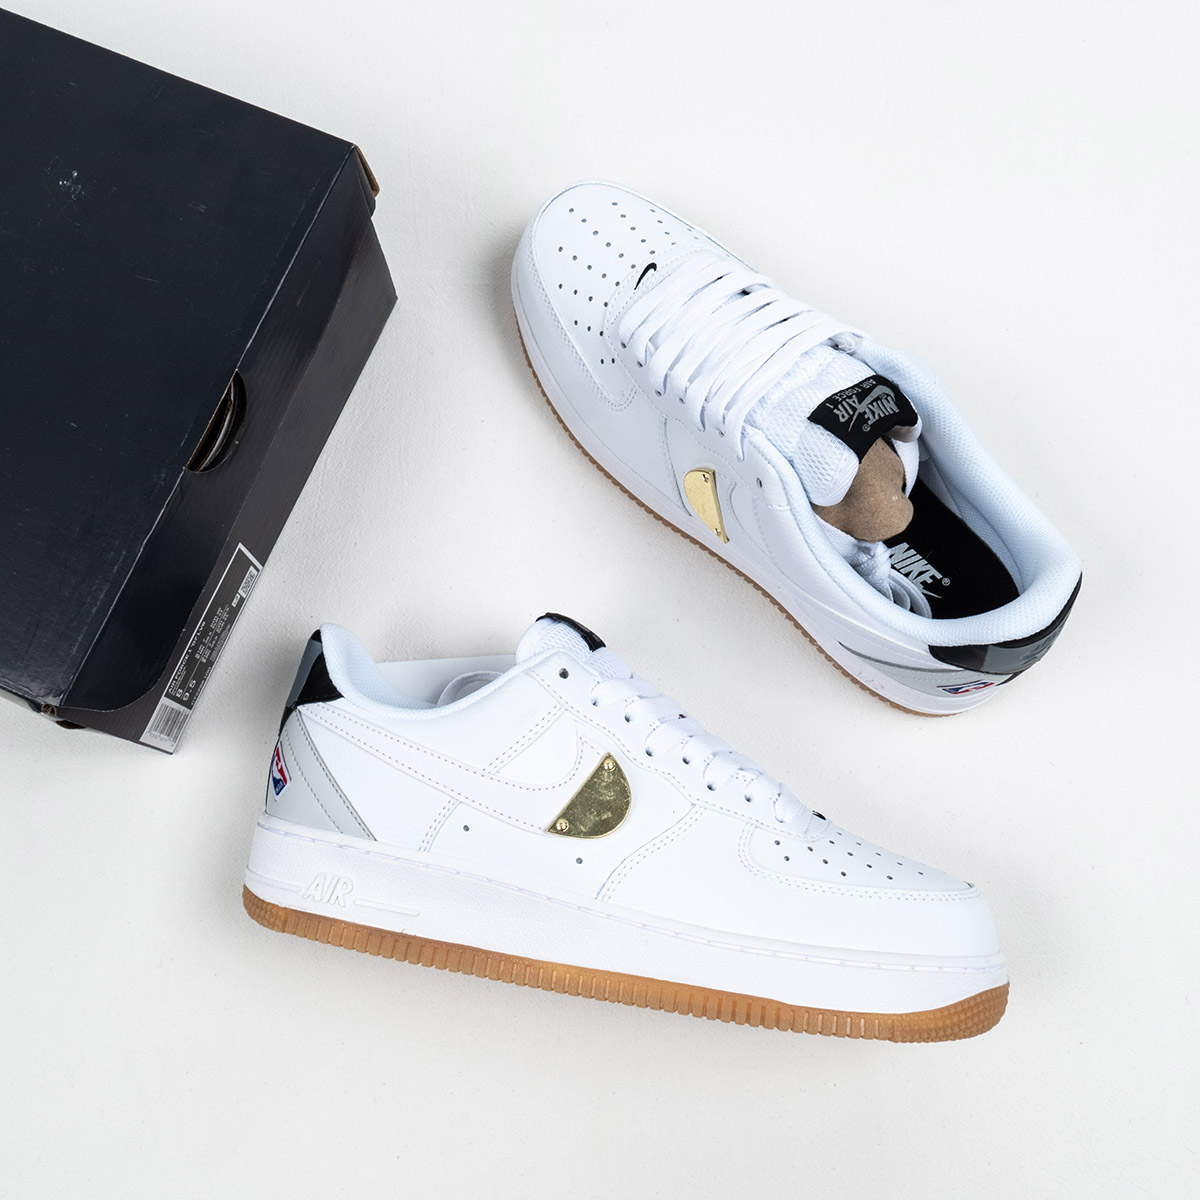 Nike Air AF Force 1 Low 'NBA' White Grey Gum Shoes